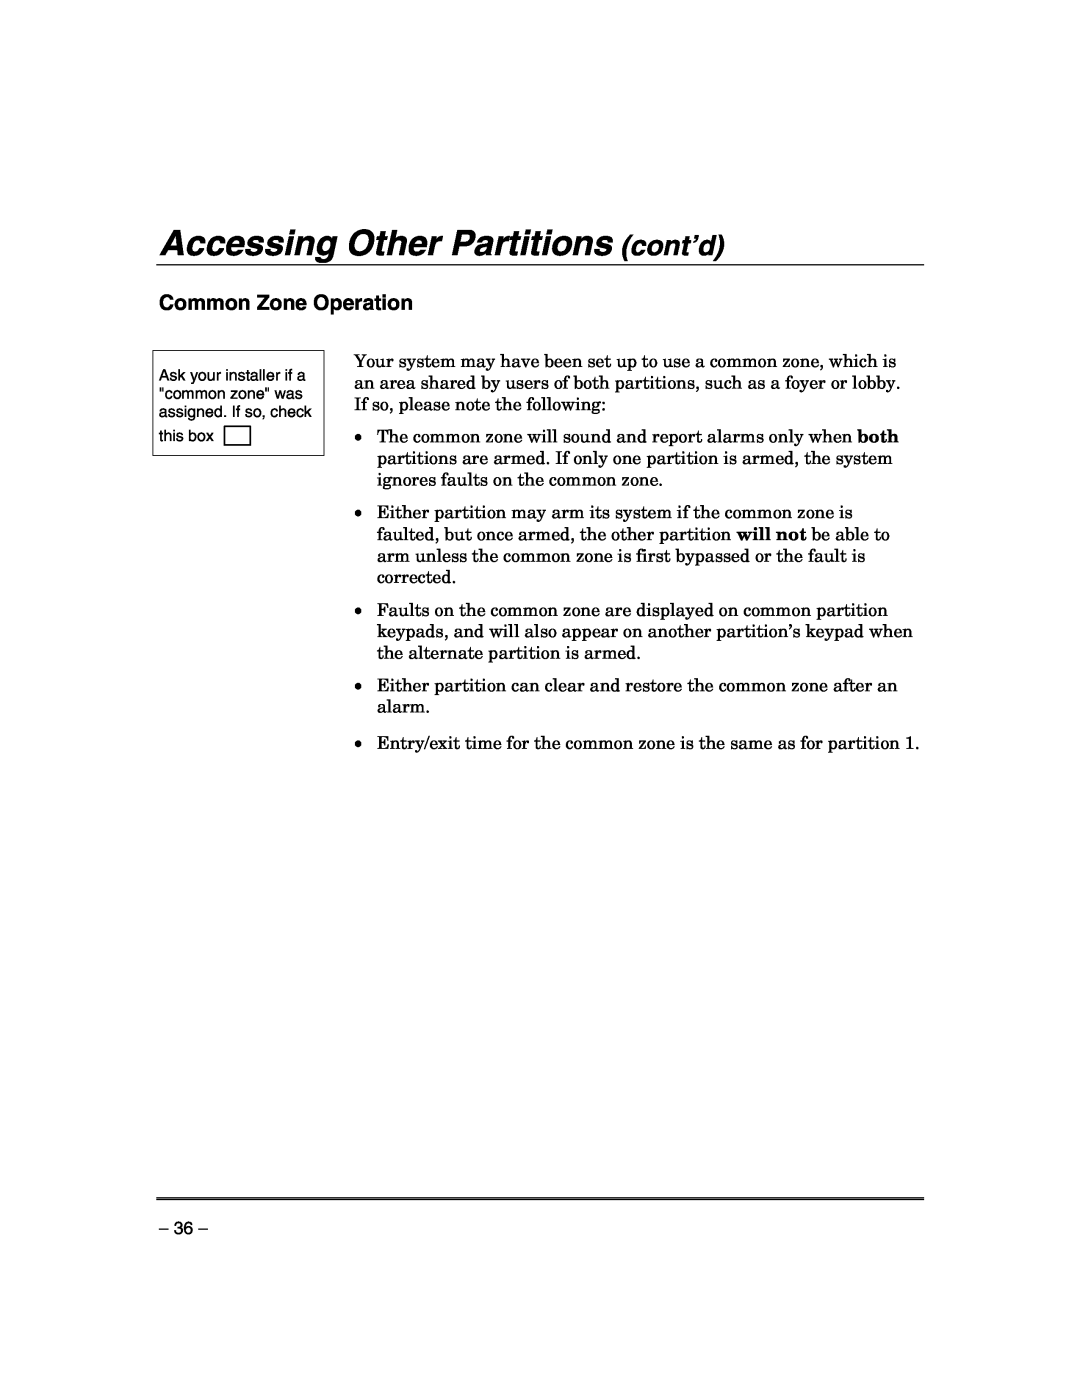 Honeywell VISTA-21IPSIA manual Common Zone Operation, Accessing Other Partitions cont’d 